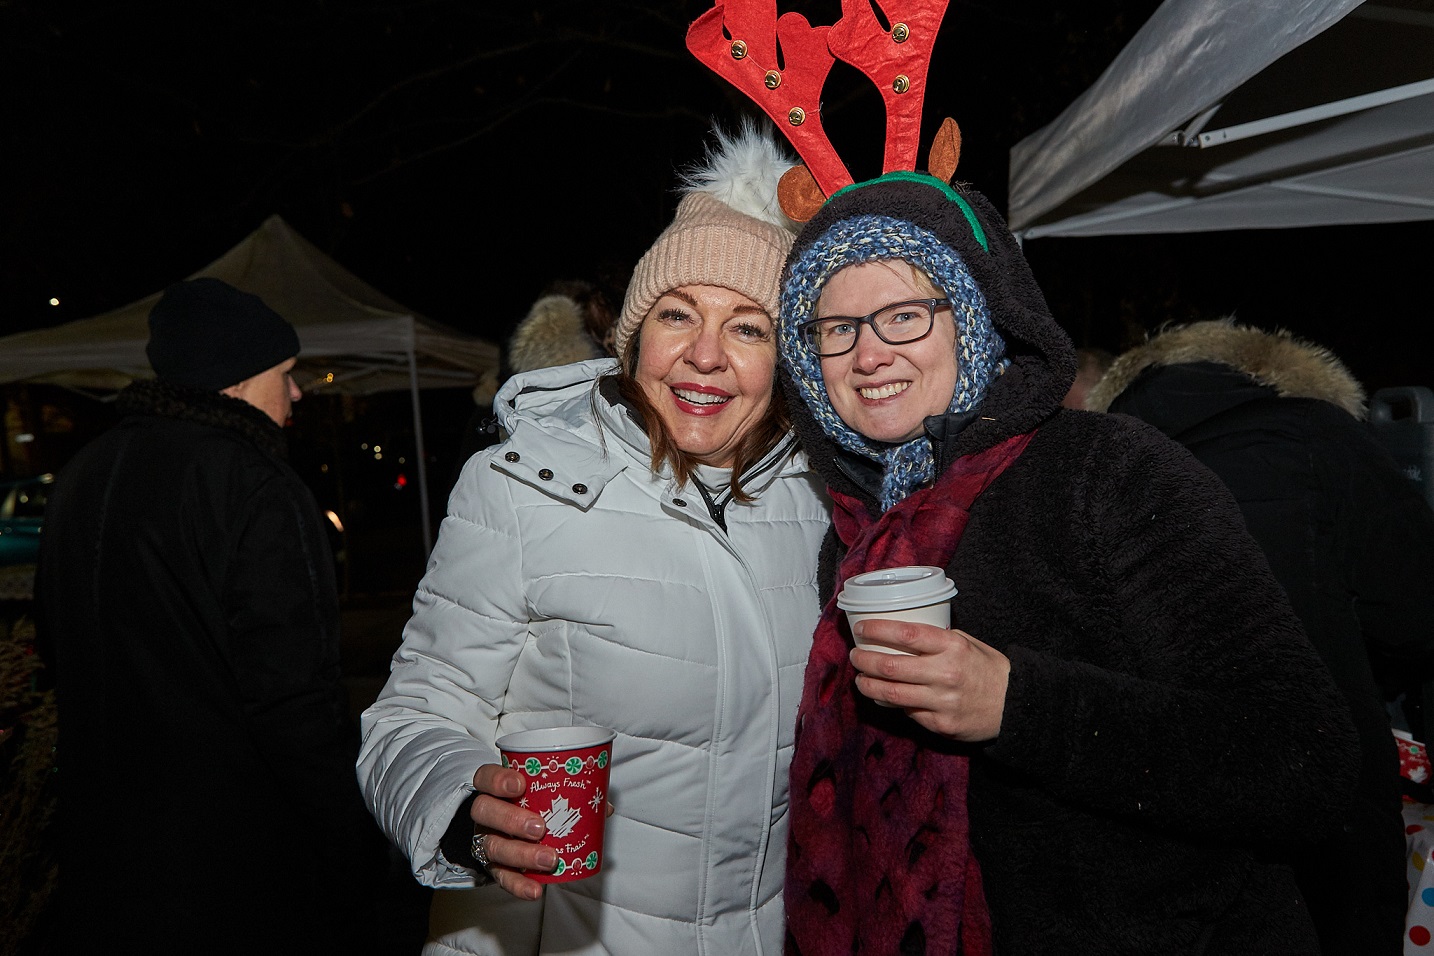 Dianna Kennedy, event co-sponsor and Riverside BIA Board member with Jennifer Lay, Riverside BIA Executive Director, Light Up Riverside 2019